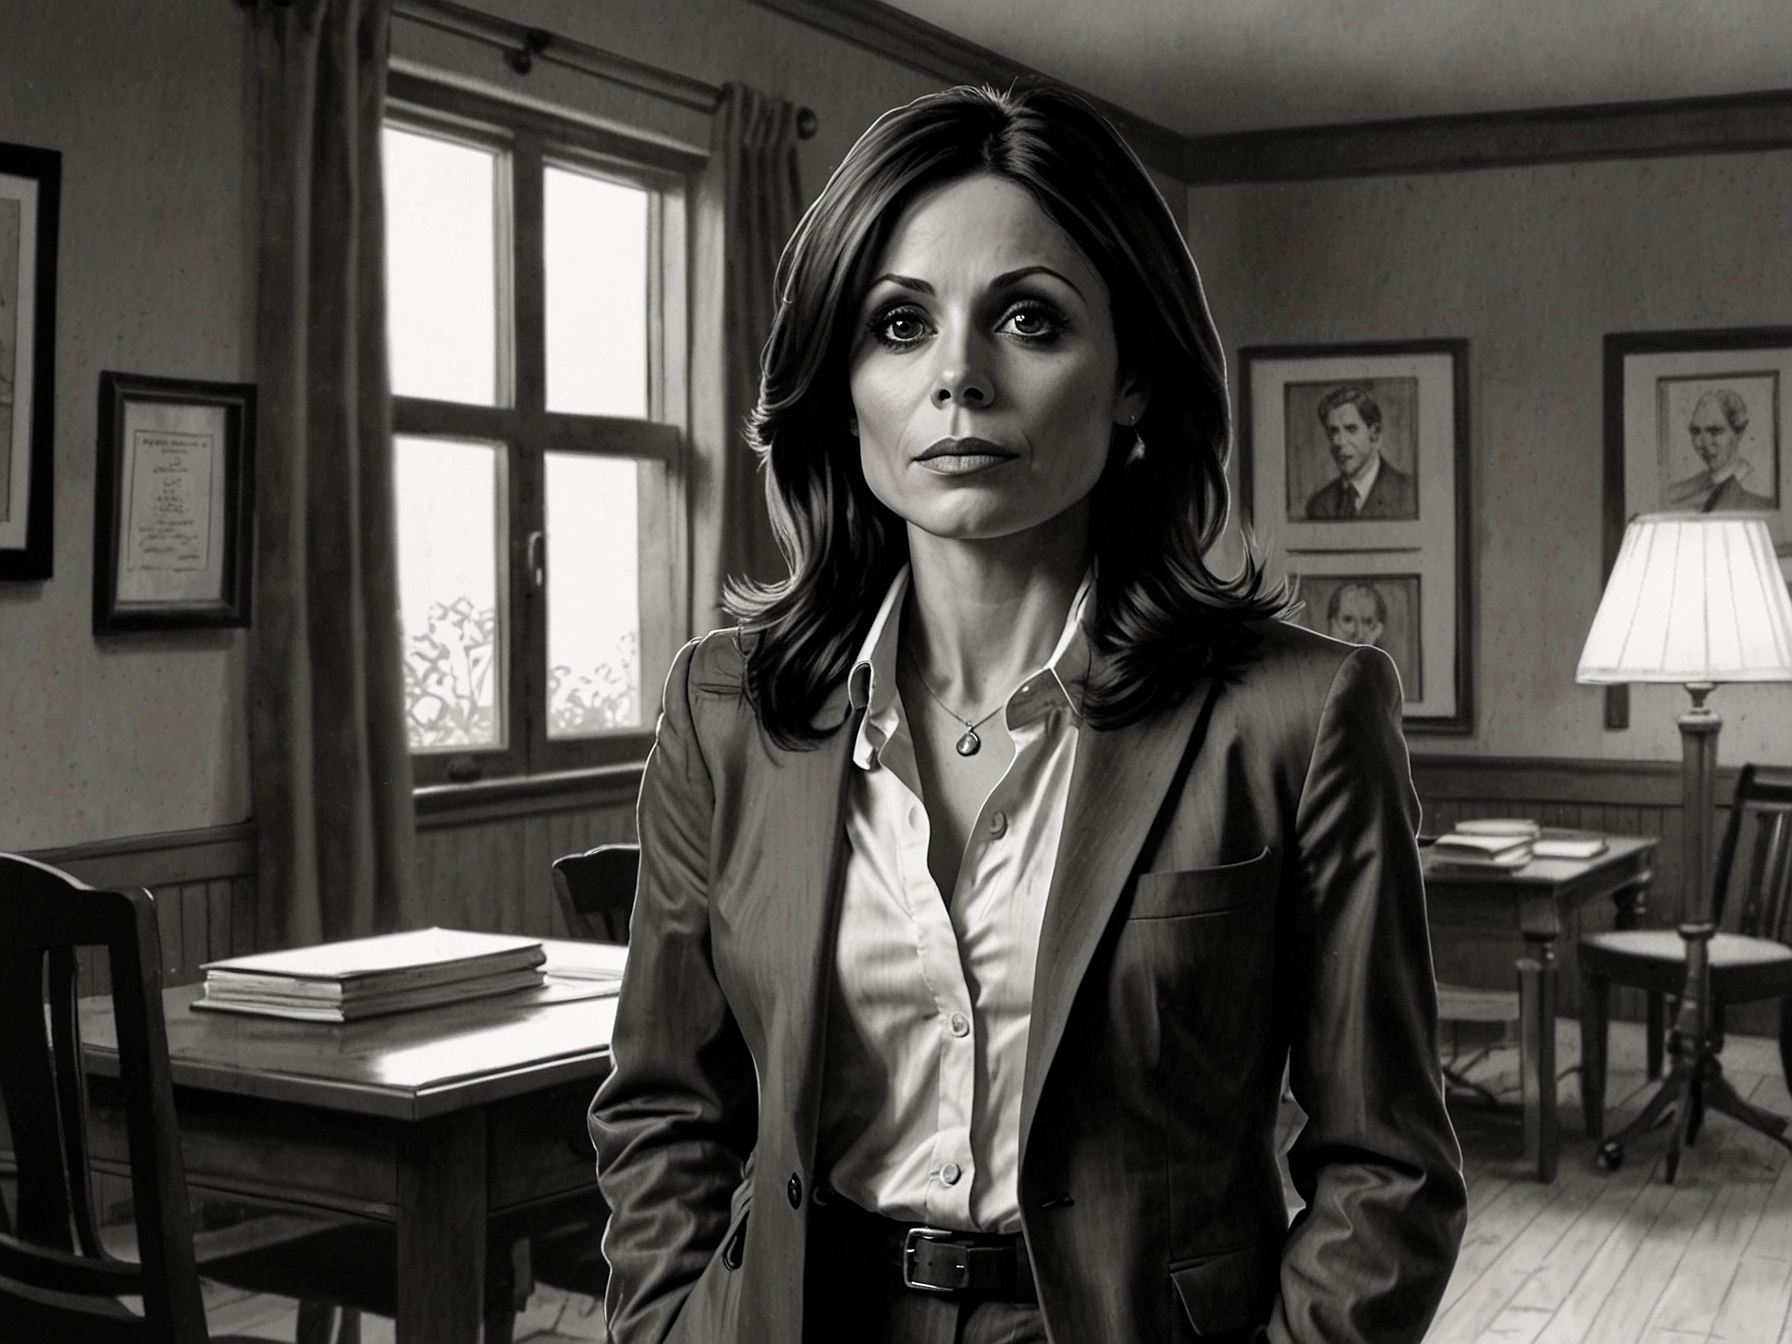 A dramatic scene from 'Danger in the Dorm,' featuring Bethenny Frankel in intense detective mode, capturing the suspense and intrigue of this true crime thriller.